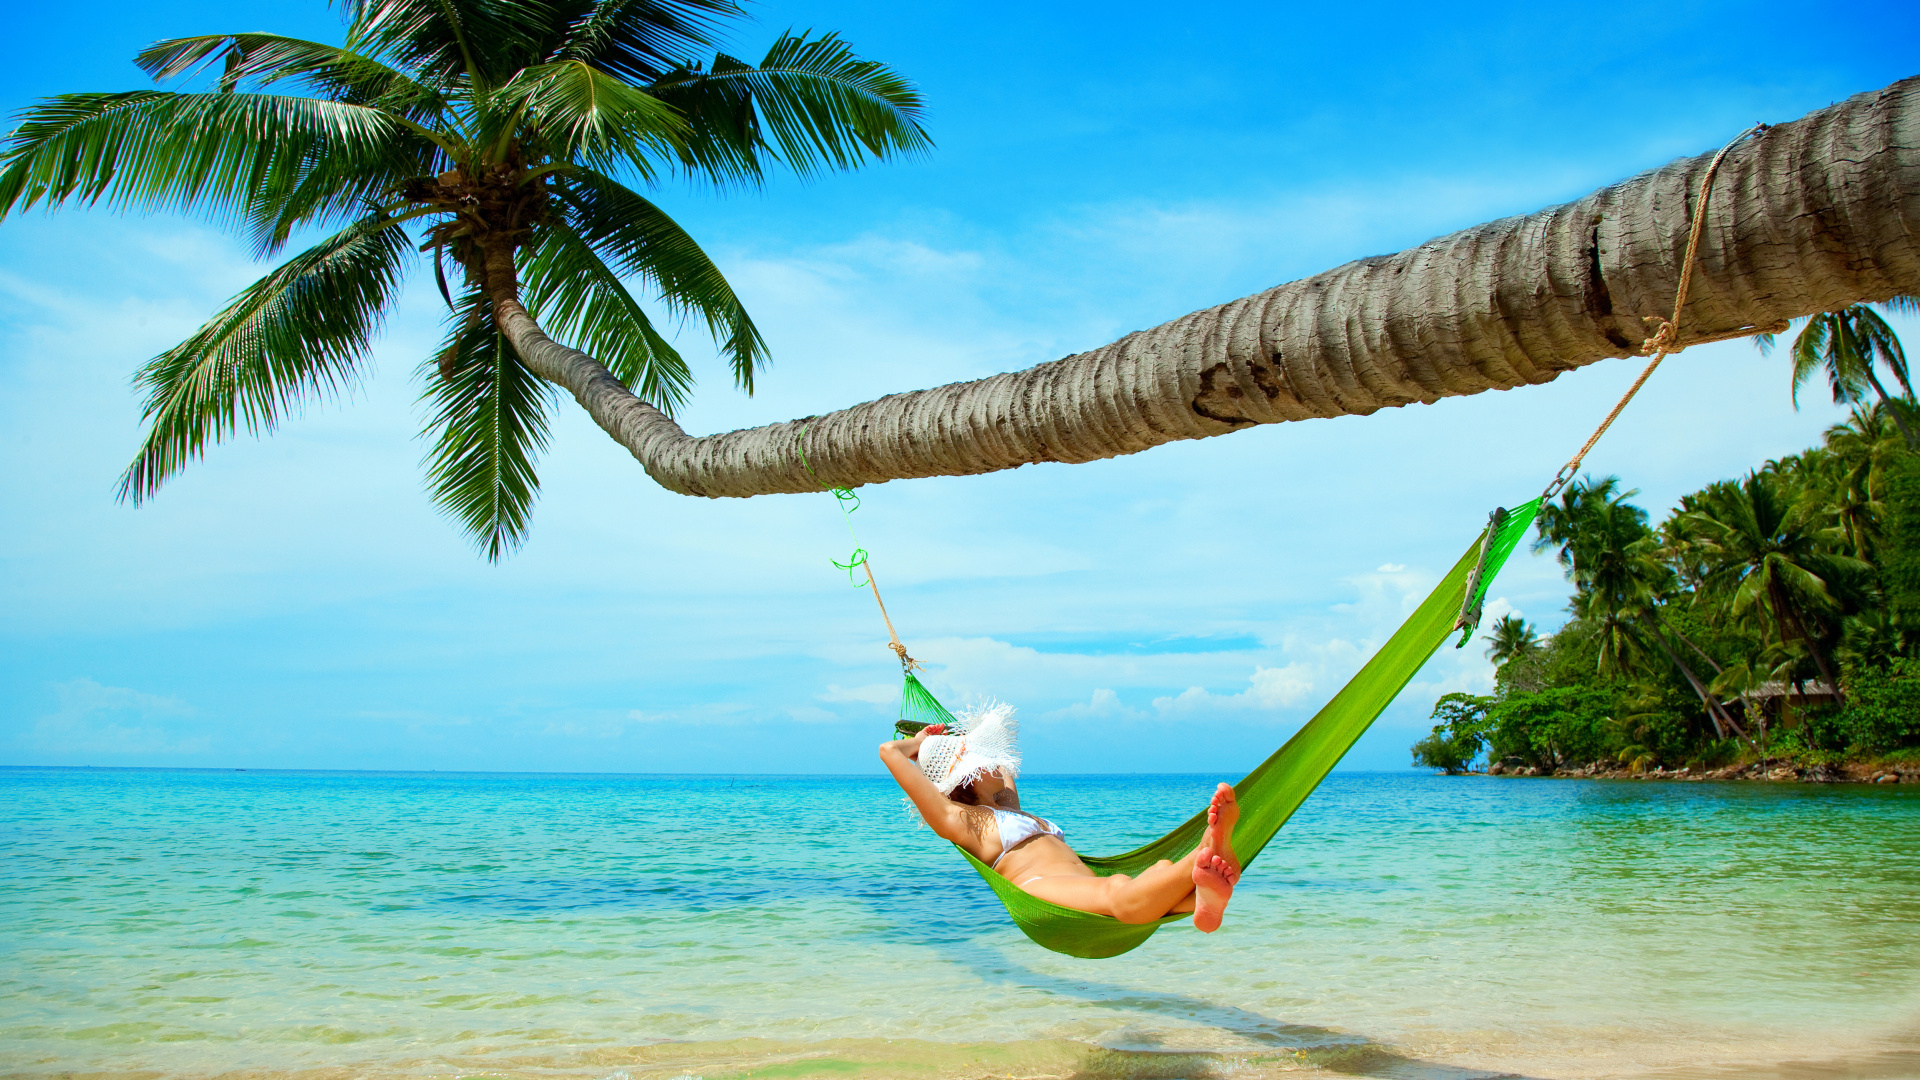 Woman in White Shirt and Green Shorts Lying on Hammock Under Coconut Tree During Daytime. Wallpaper in 1920x1080 Resolution